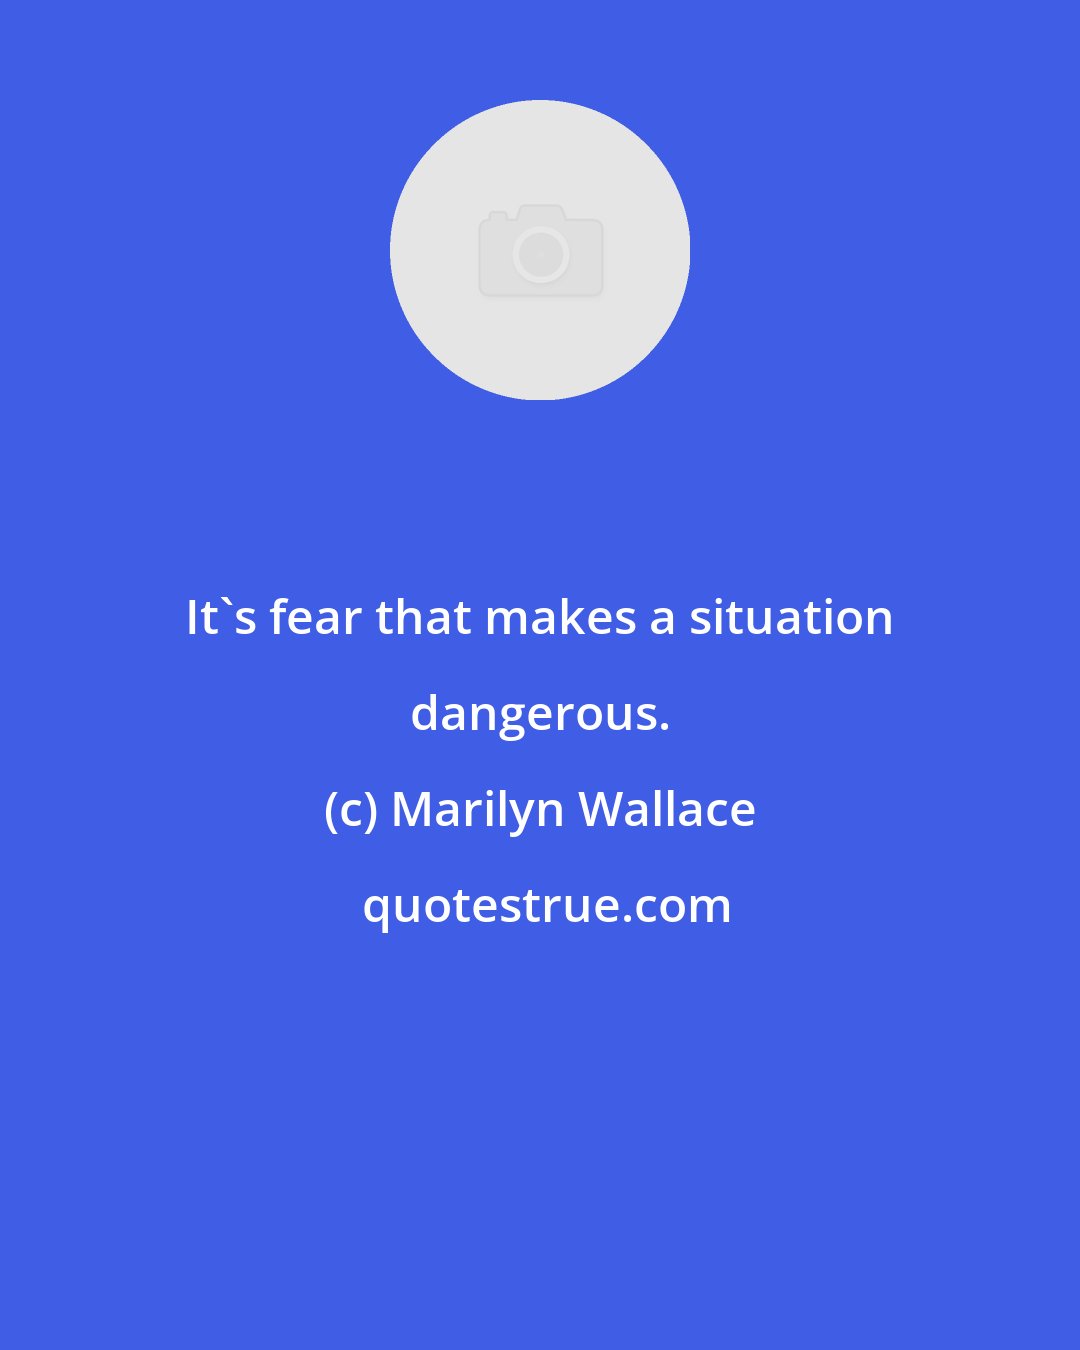 Marilyn Wallace: It's fear that makes a situation dangerous.